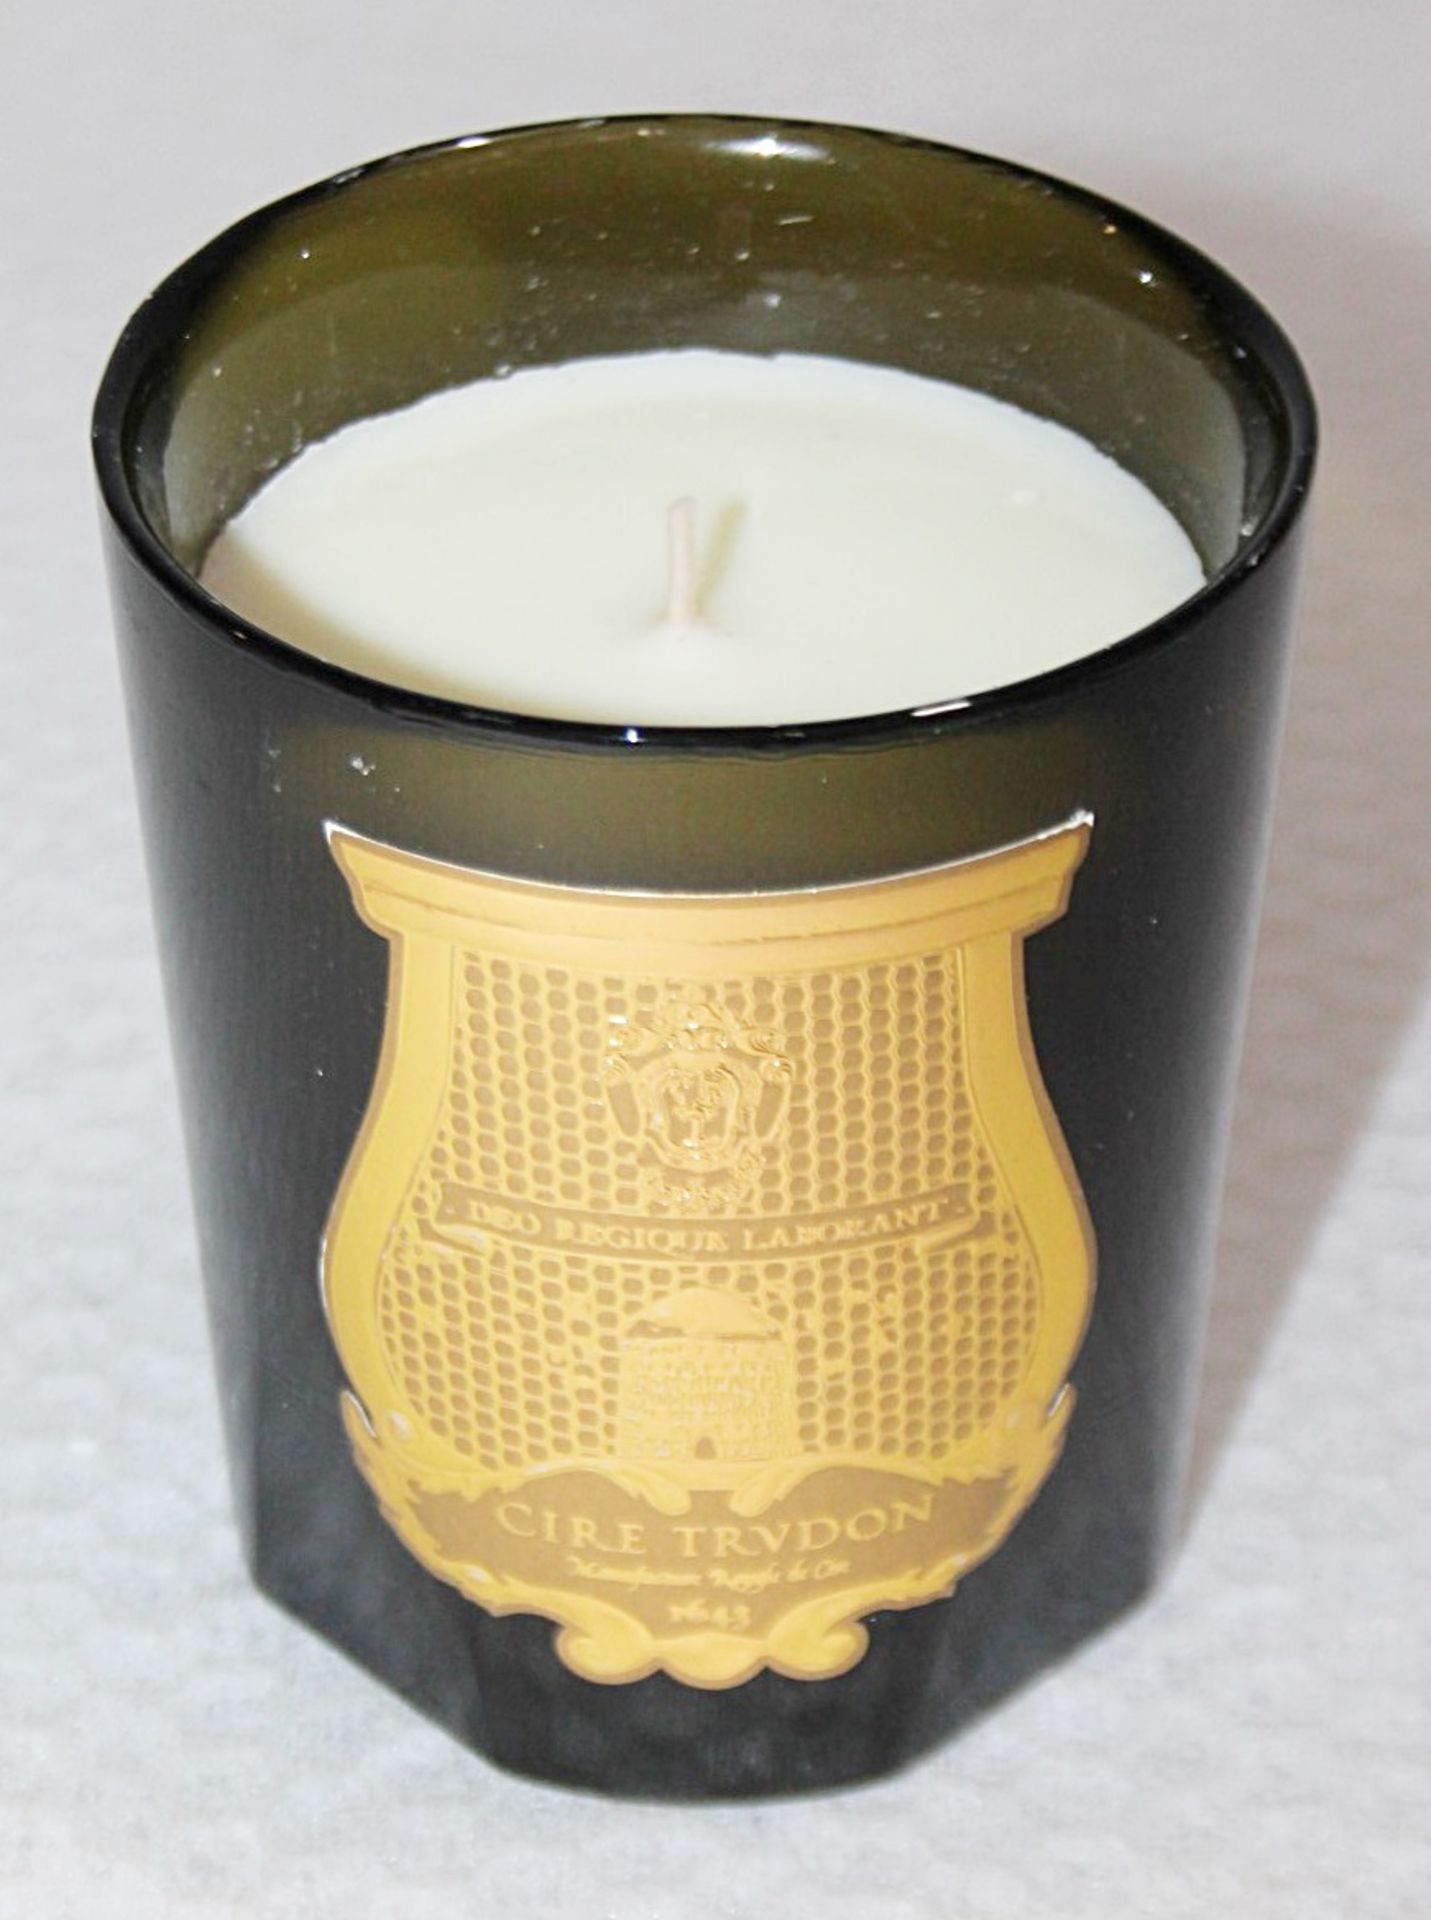 1 x CIRE TRUDON Luxury Scented Candle (270g) - Original Price £85.00 - Handmade in France - Image 4 of 5